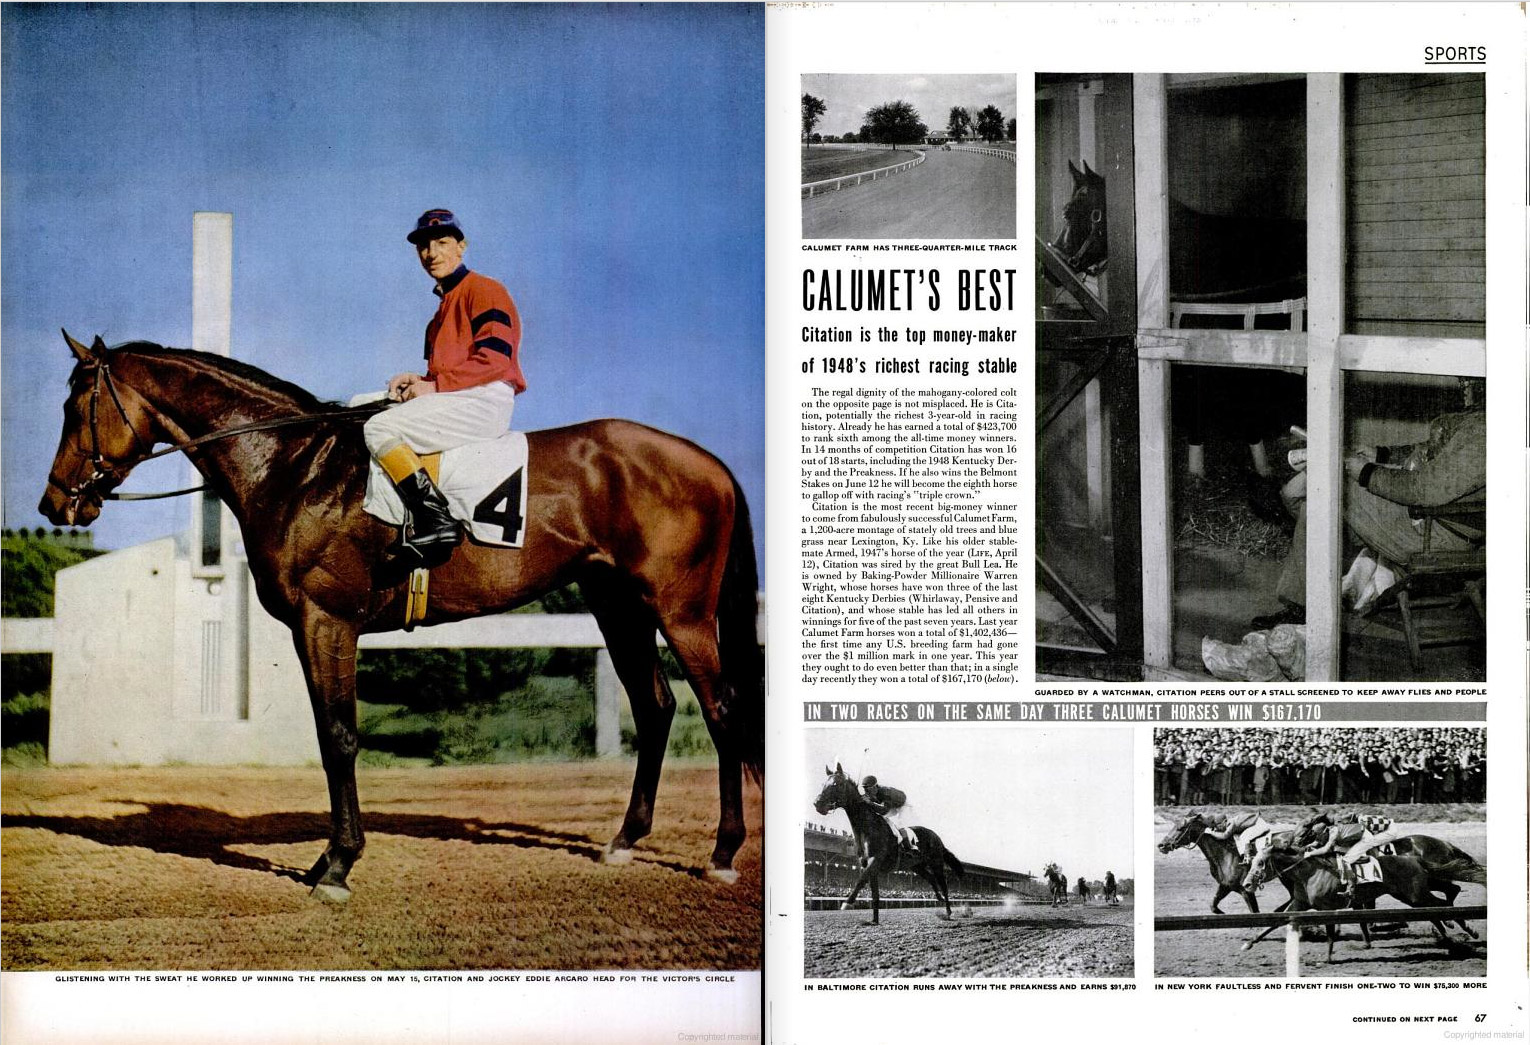 Photos: 1948 Triple Crown Winner Citation From LIFE Magazine Feature ...